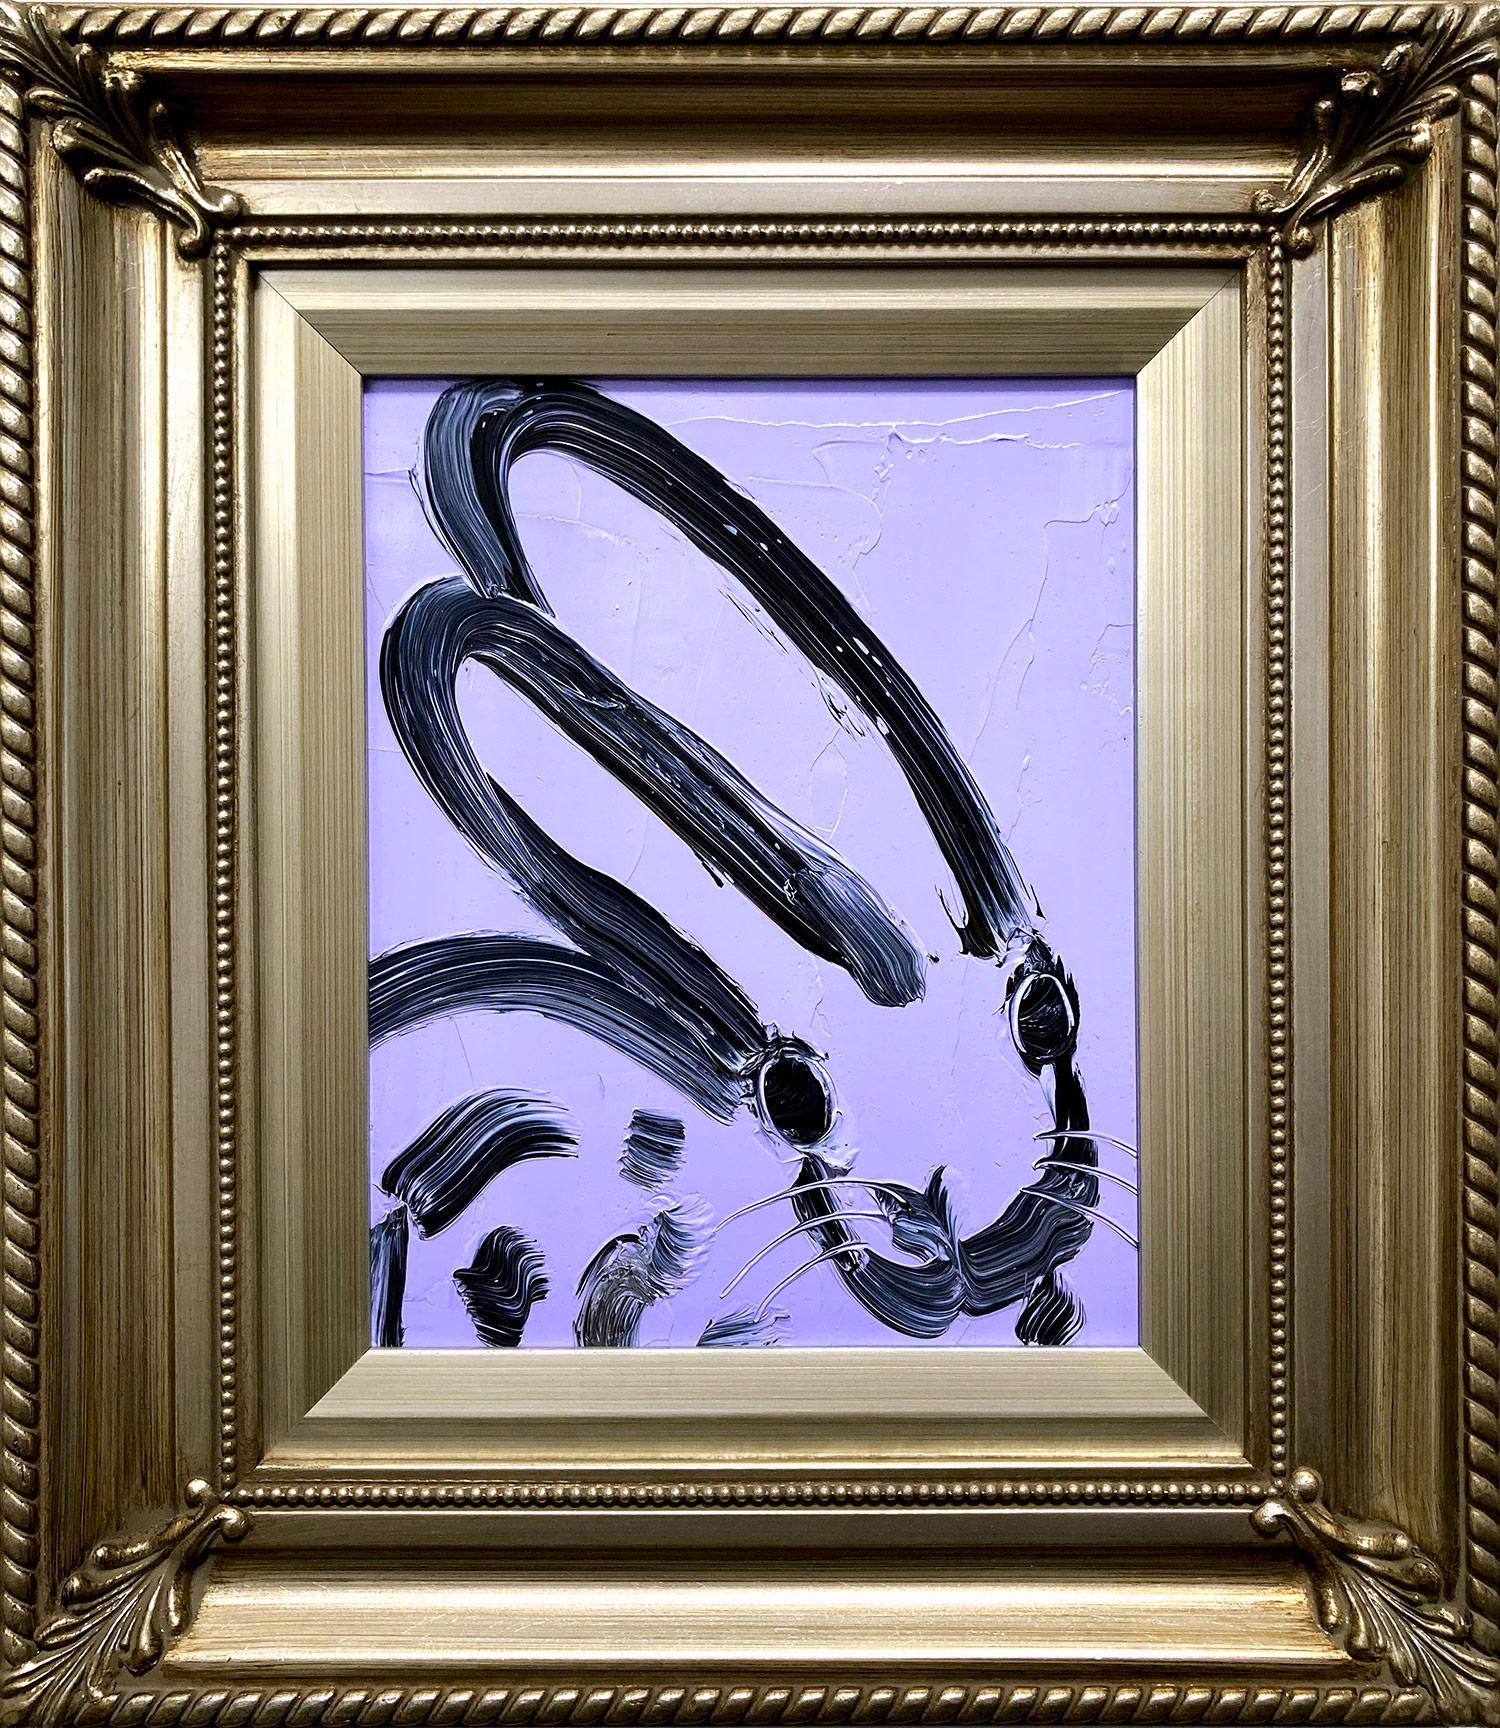 Hunt Slonem Abstract Painting - "Flip" Black Bunny on Lavender Purple Background Oil Painting on Wood Panel